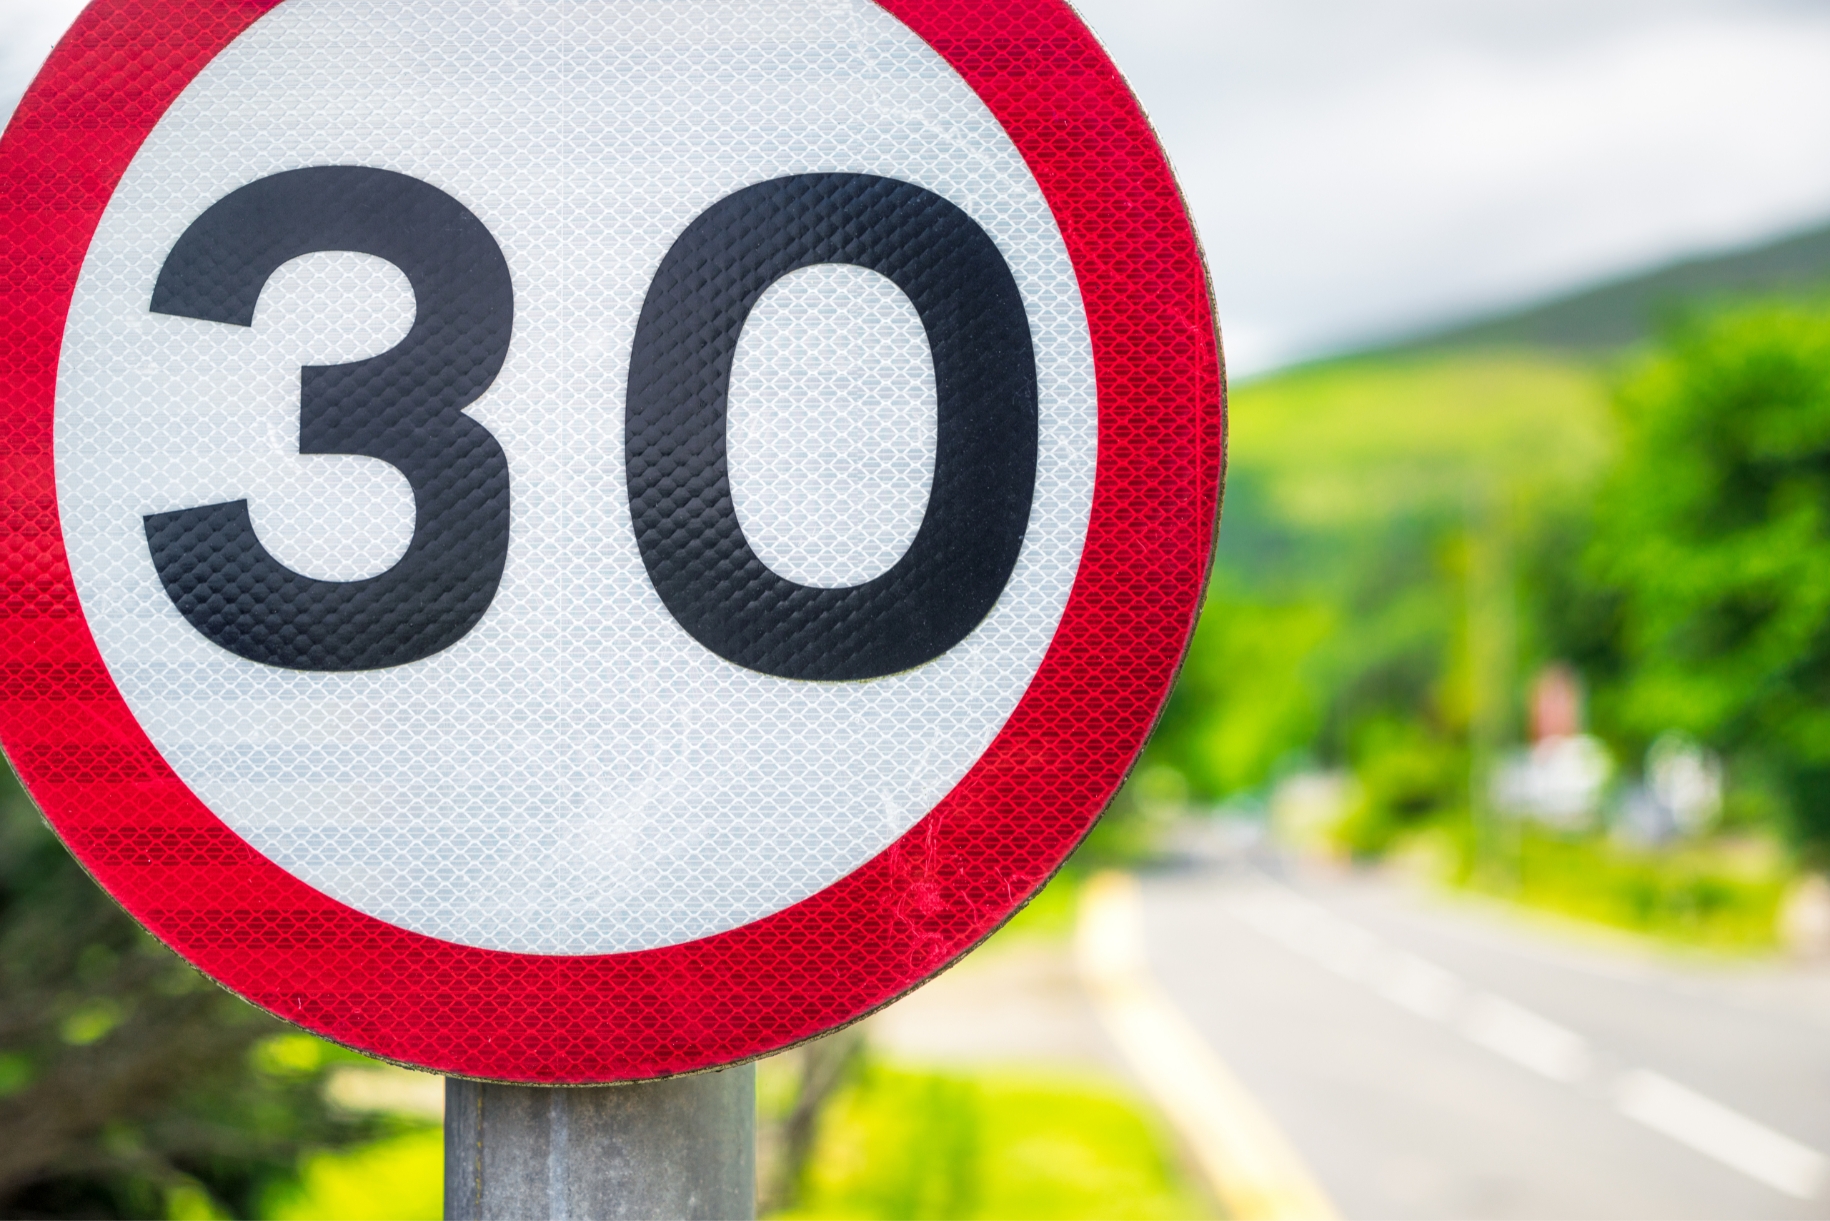 30 mph road safety sign